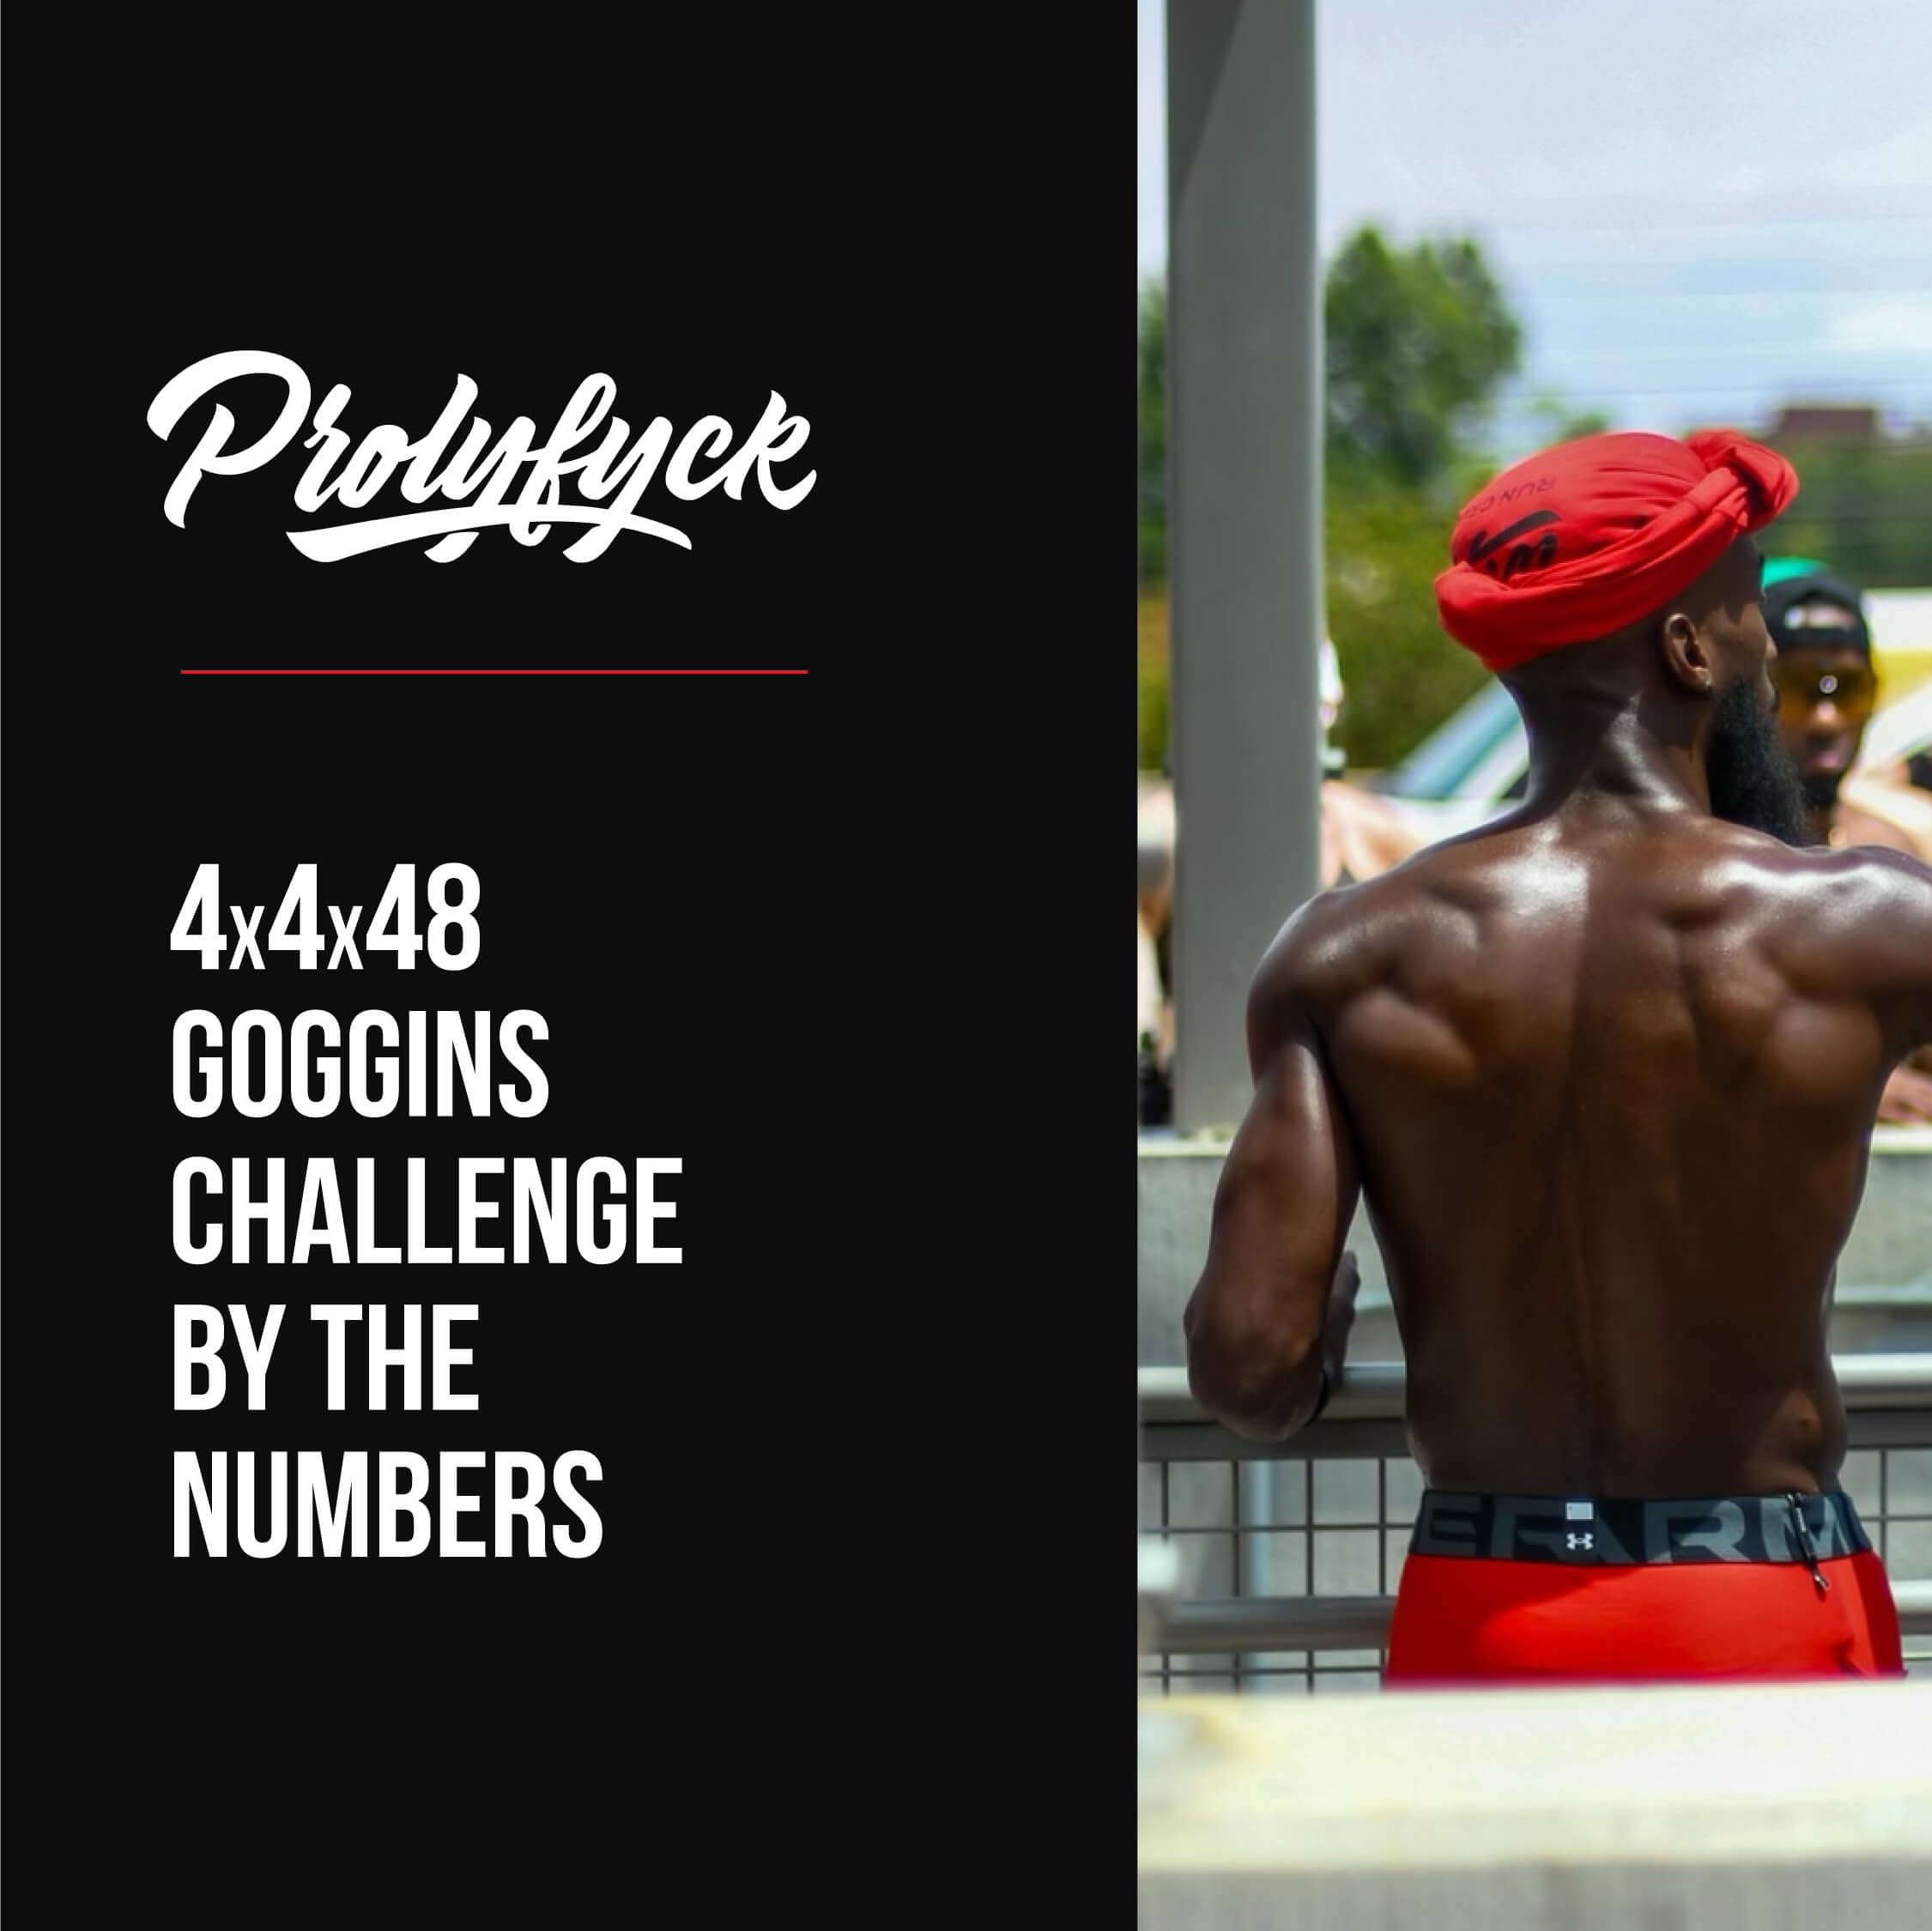 Prolyfyck 4x4x48 GOGGINS CHALLENGE BY THE NUMBERS